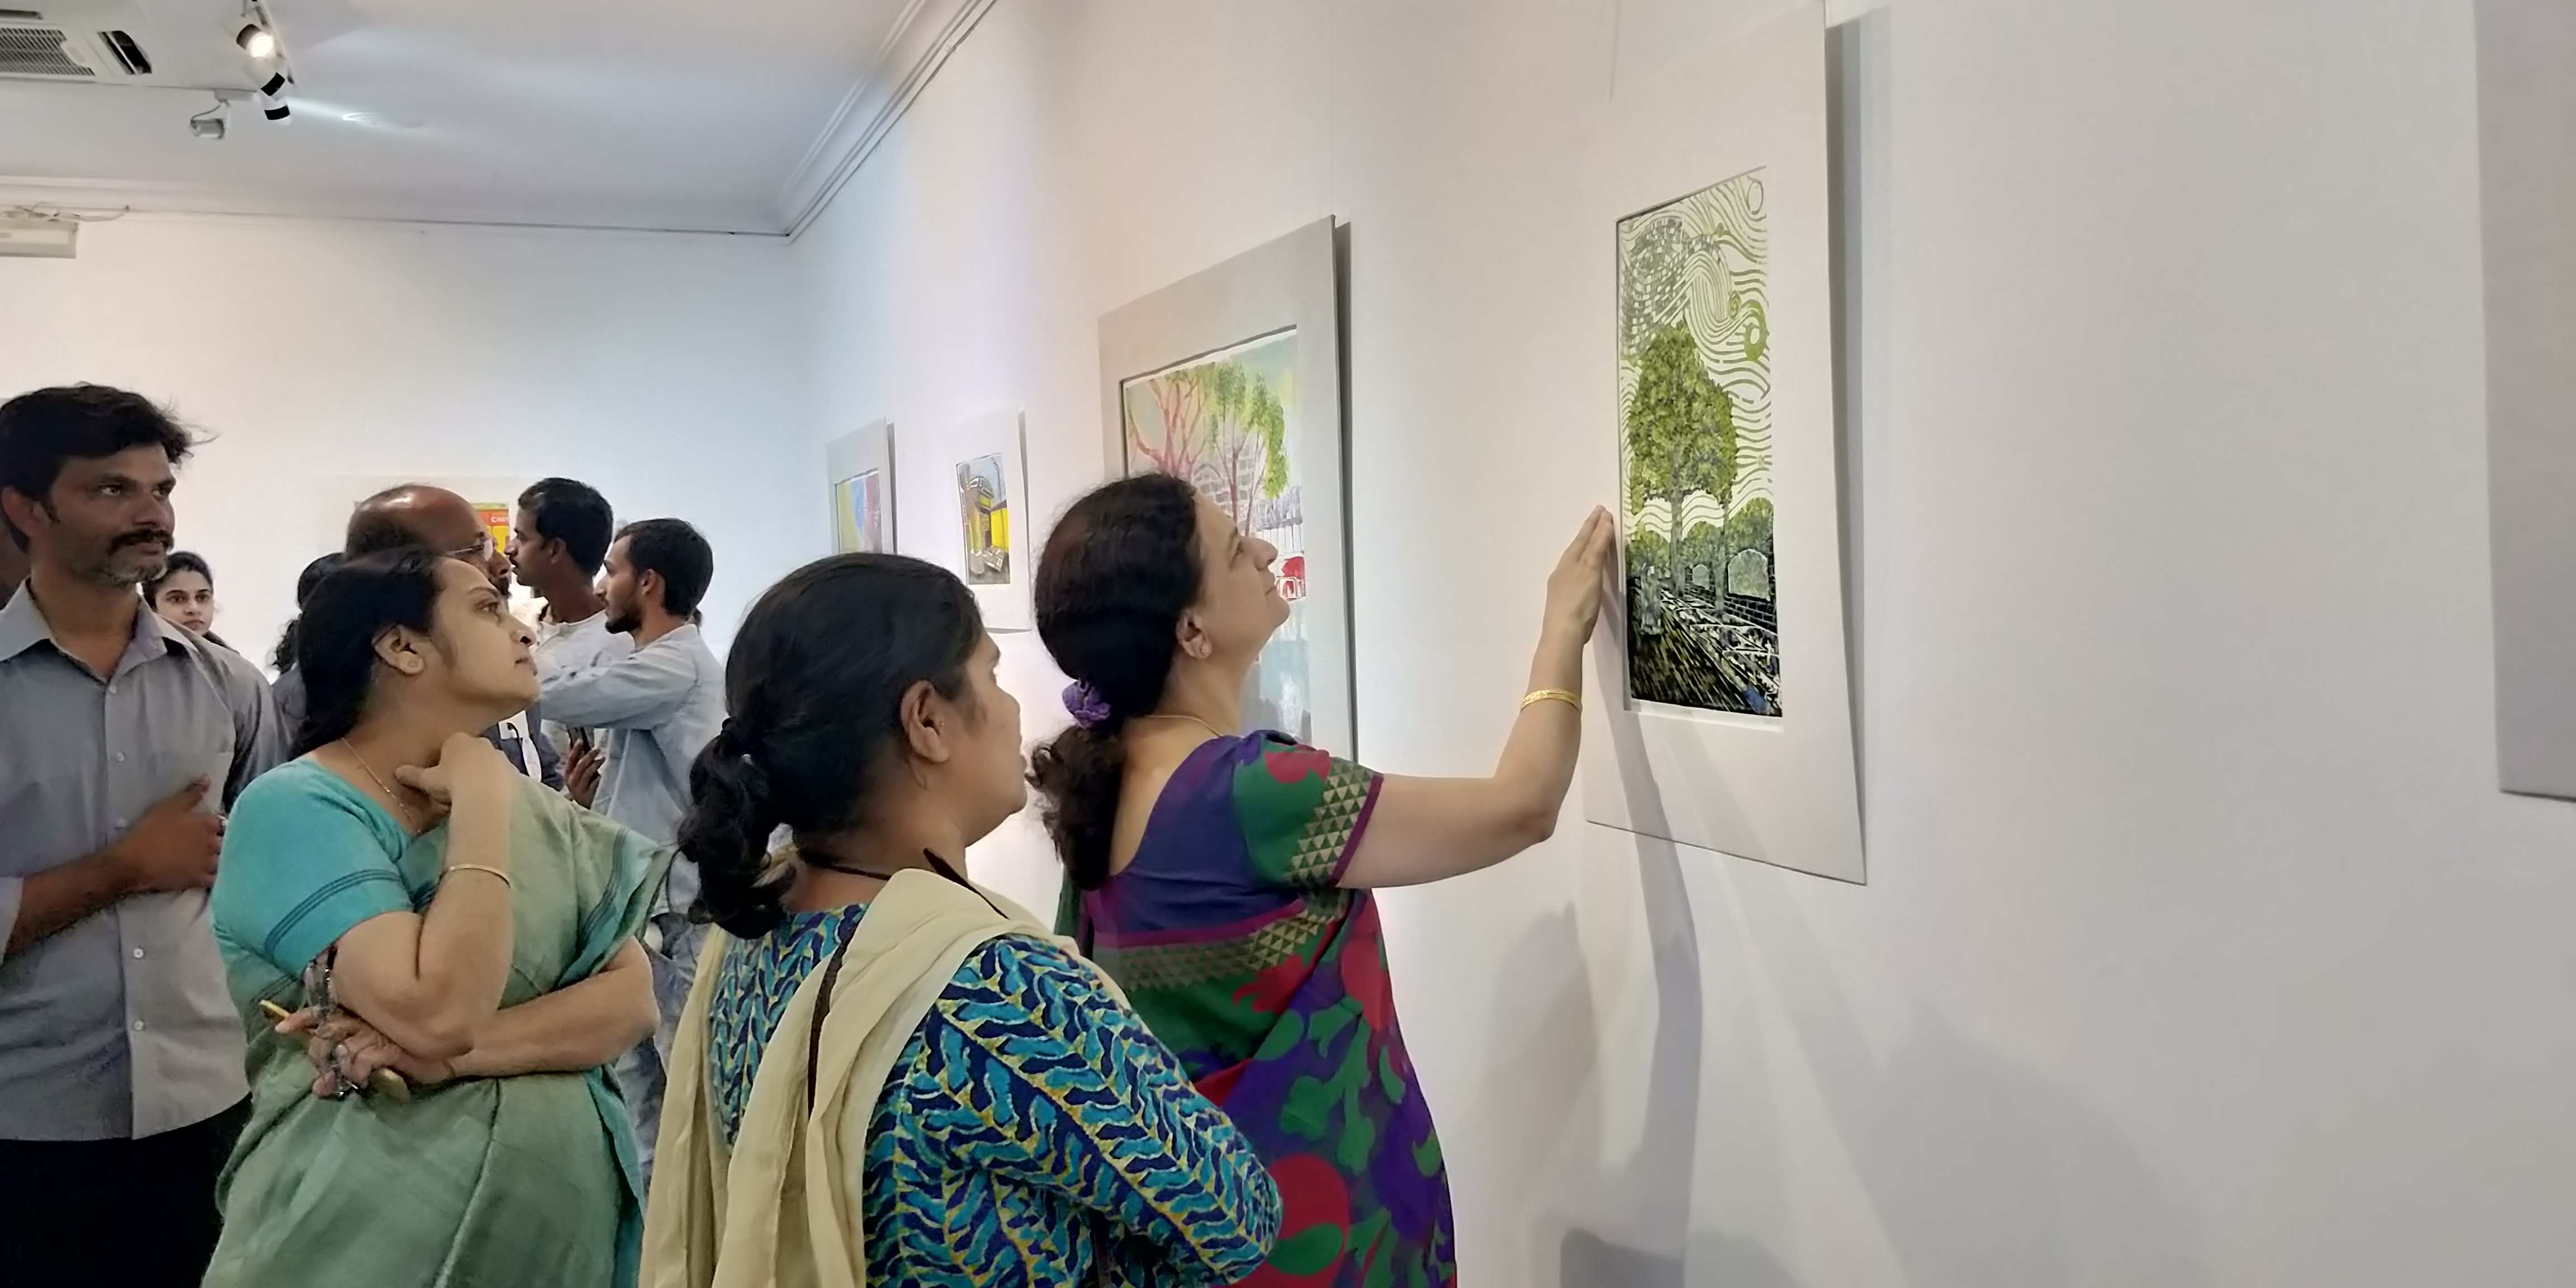 https://jnafau.ac.in/wp-content/uploads/2018/05/Honble-Vice-chancellor-Prof.-Kavita-Daryani-Rao-having-a-look-at-the-works-on-display.jpg